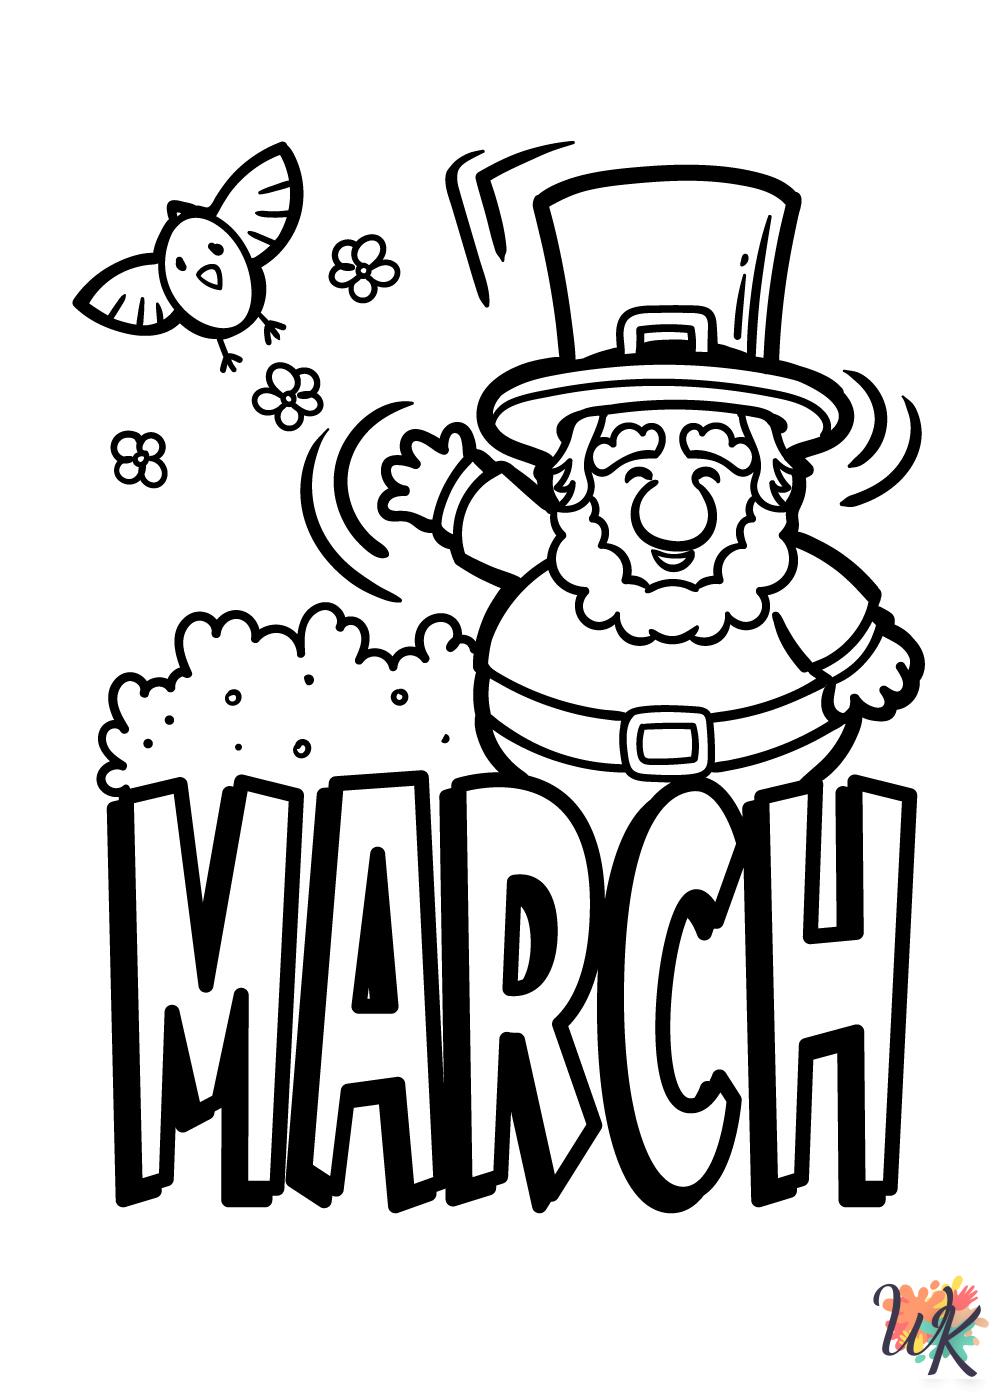 March free coloring pages 1